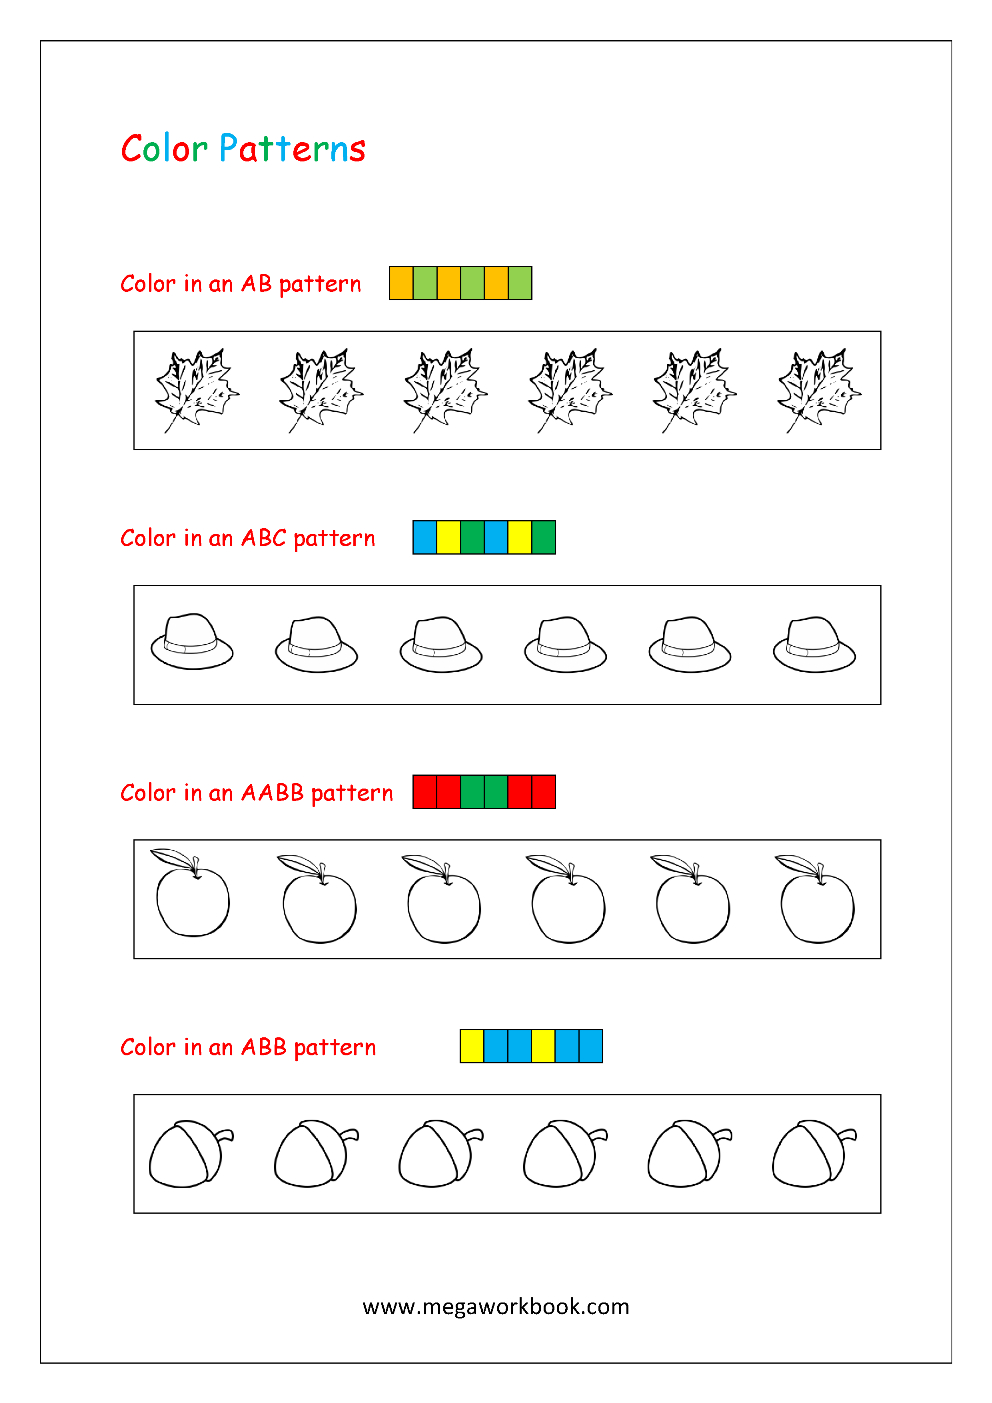 Free Printable Pattern Recognition Worksheets - Color Patterns | Free Printable Ab Pattern Worksheets